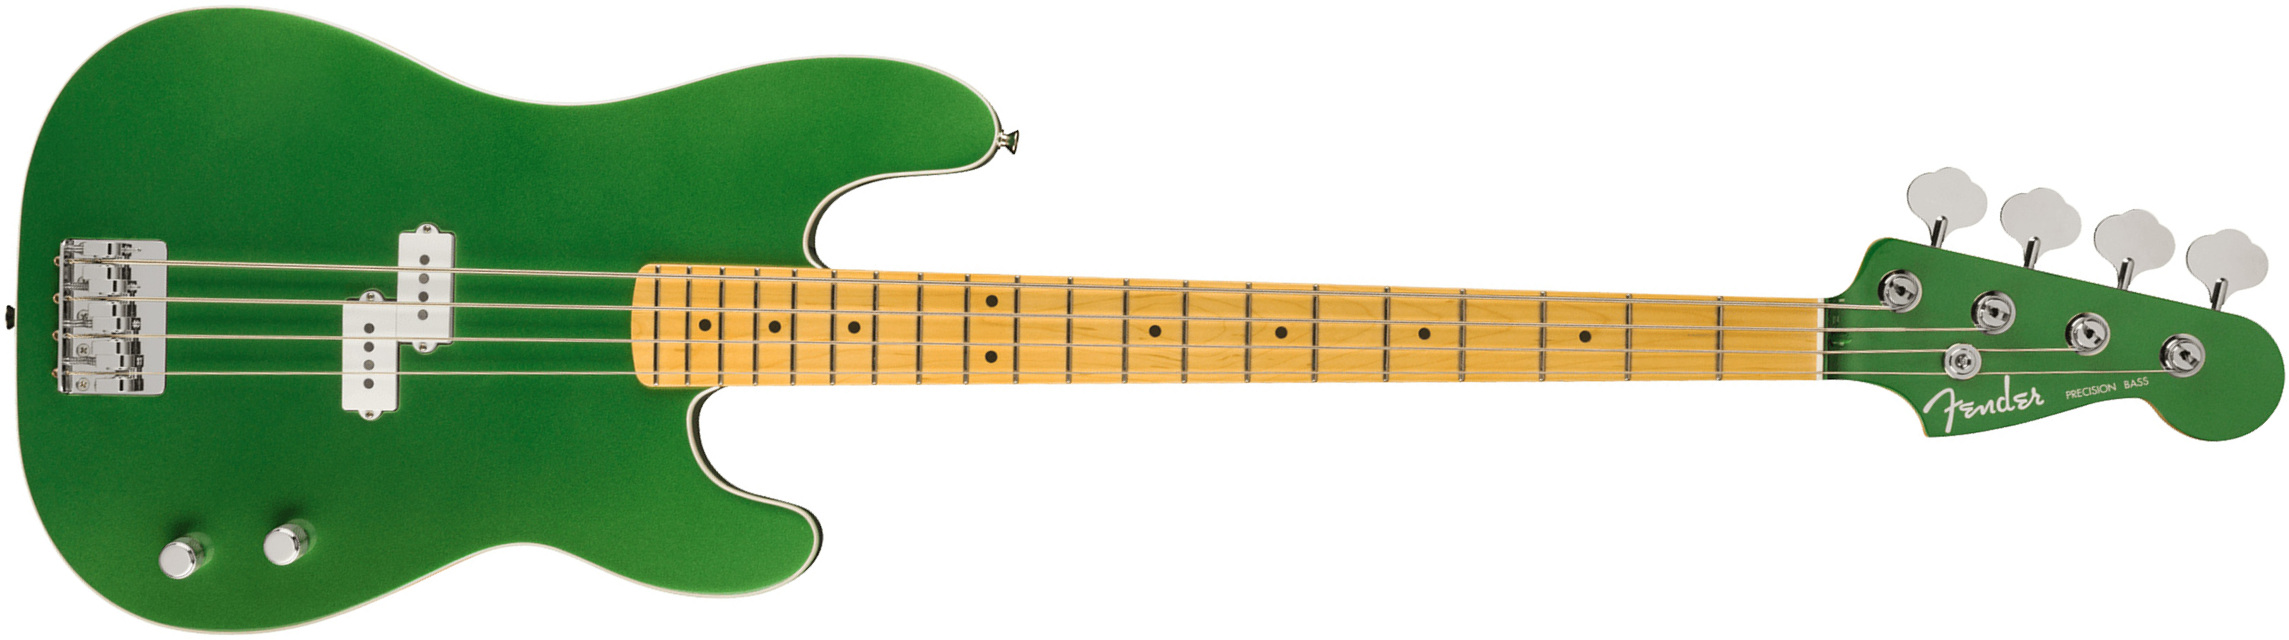 Fender Precision Bass Aerodyne Special Jap Mn - Speed Green Metallic - Solid body electric bass - Main picture